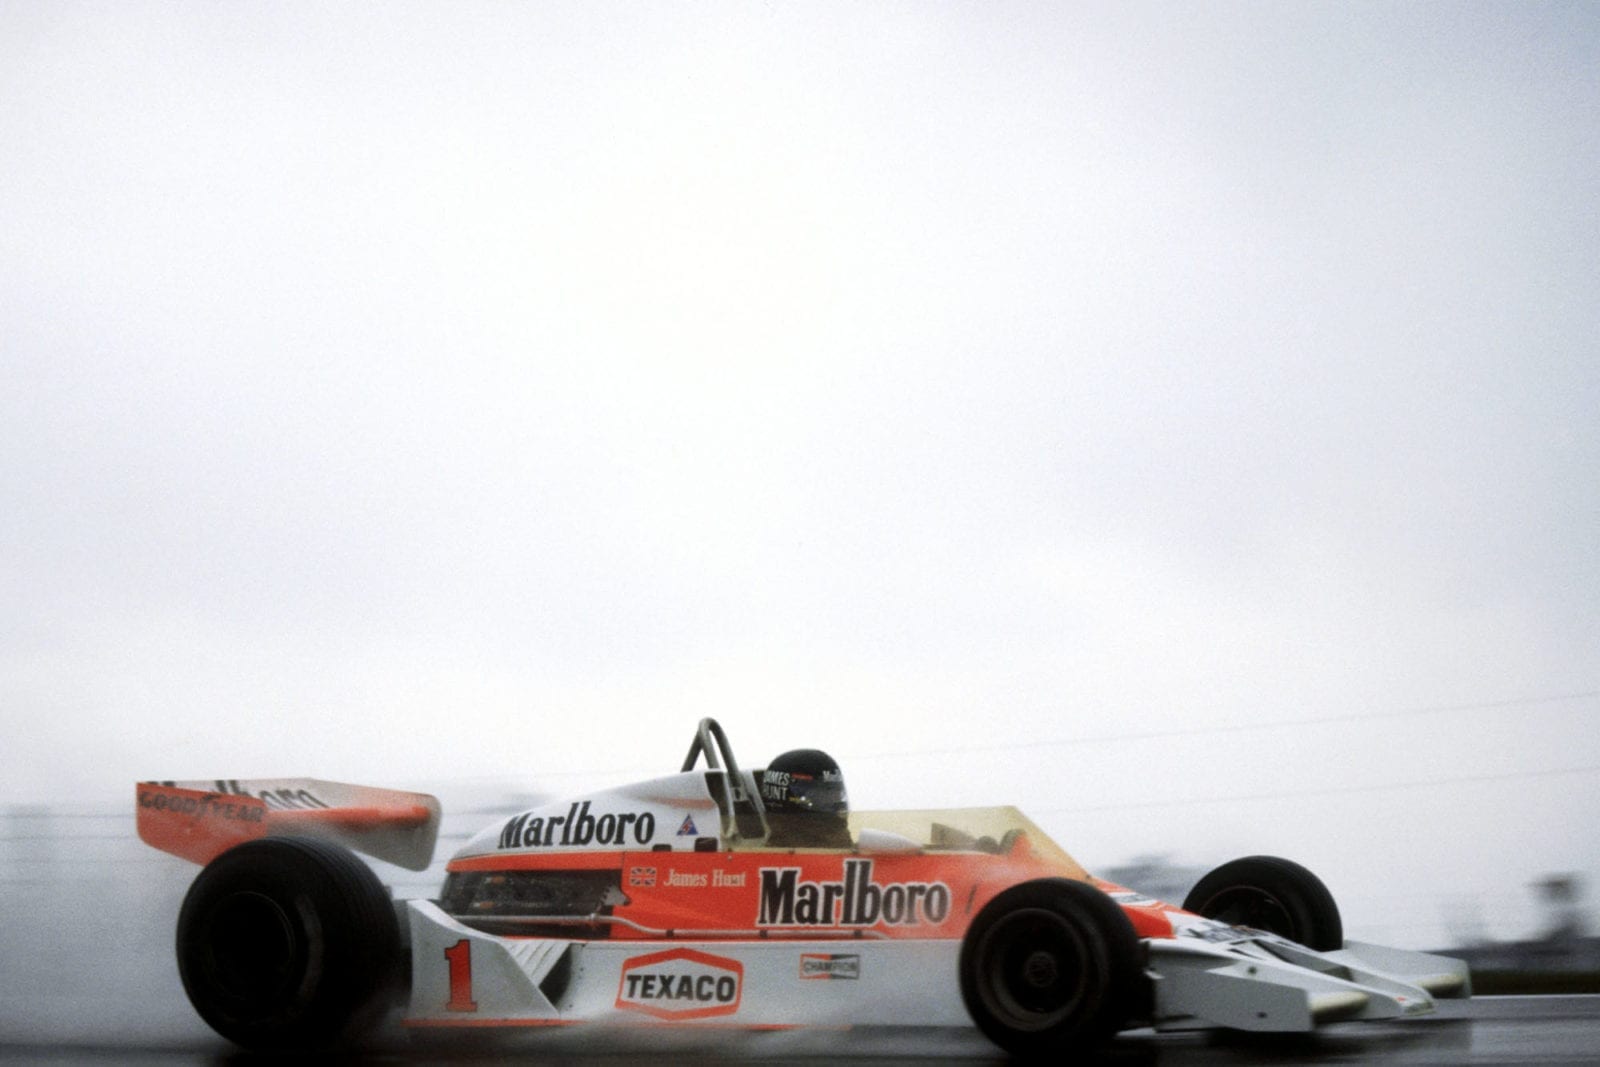 james Hunt (McLaren) driving in wet conditions at the 1977 United States Grand Prix East, Watkins Glen.